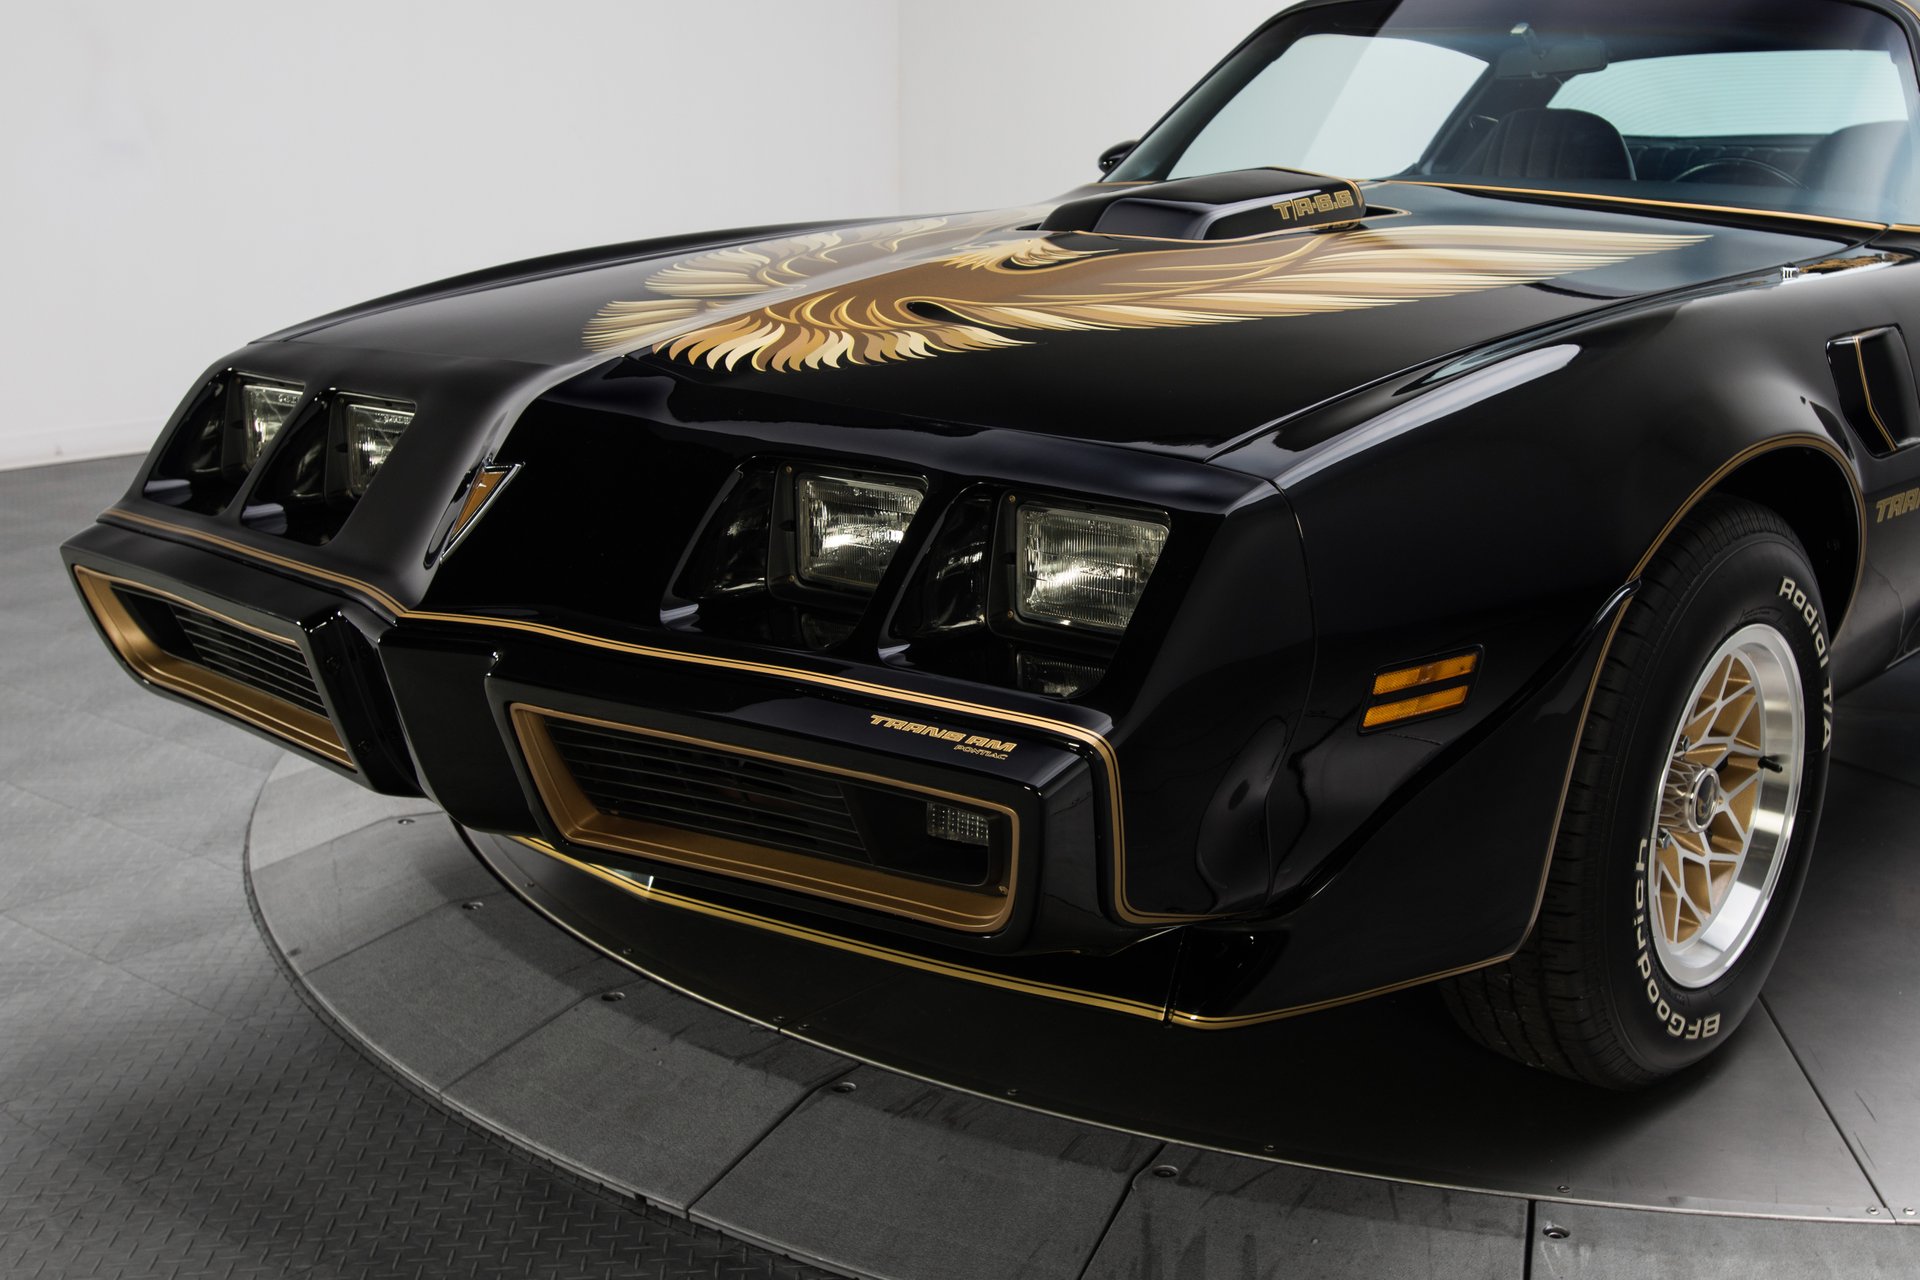 This is a 1979 Pontiac Trans Am Firebird with a new 430bhp V8